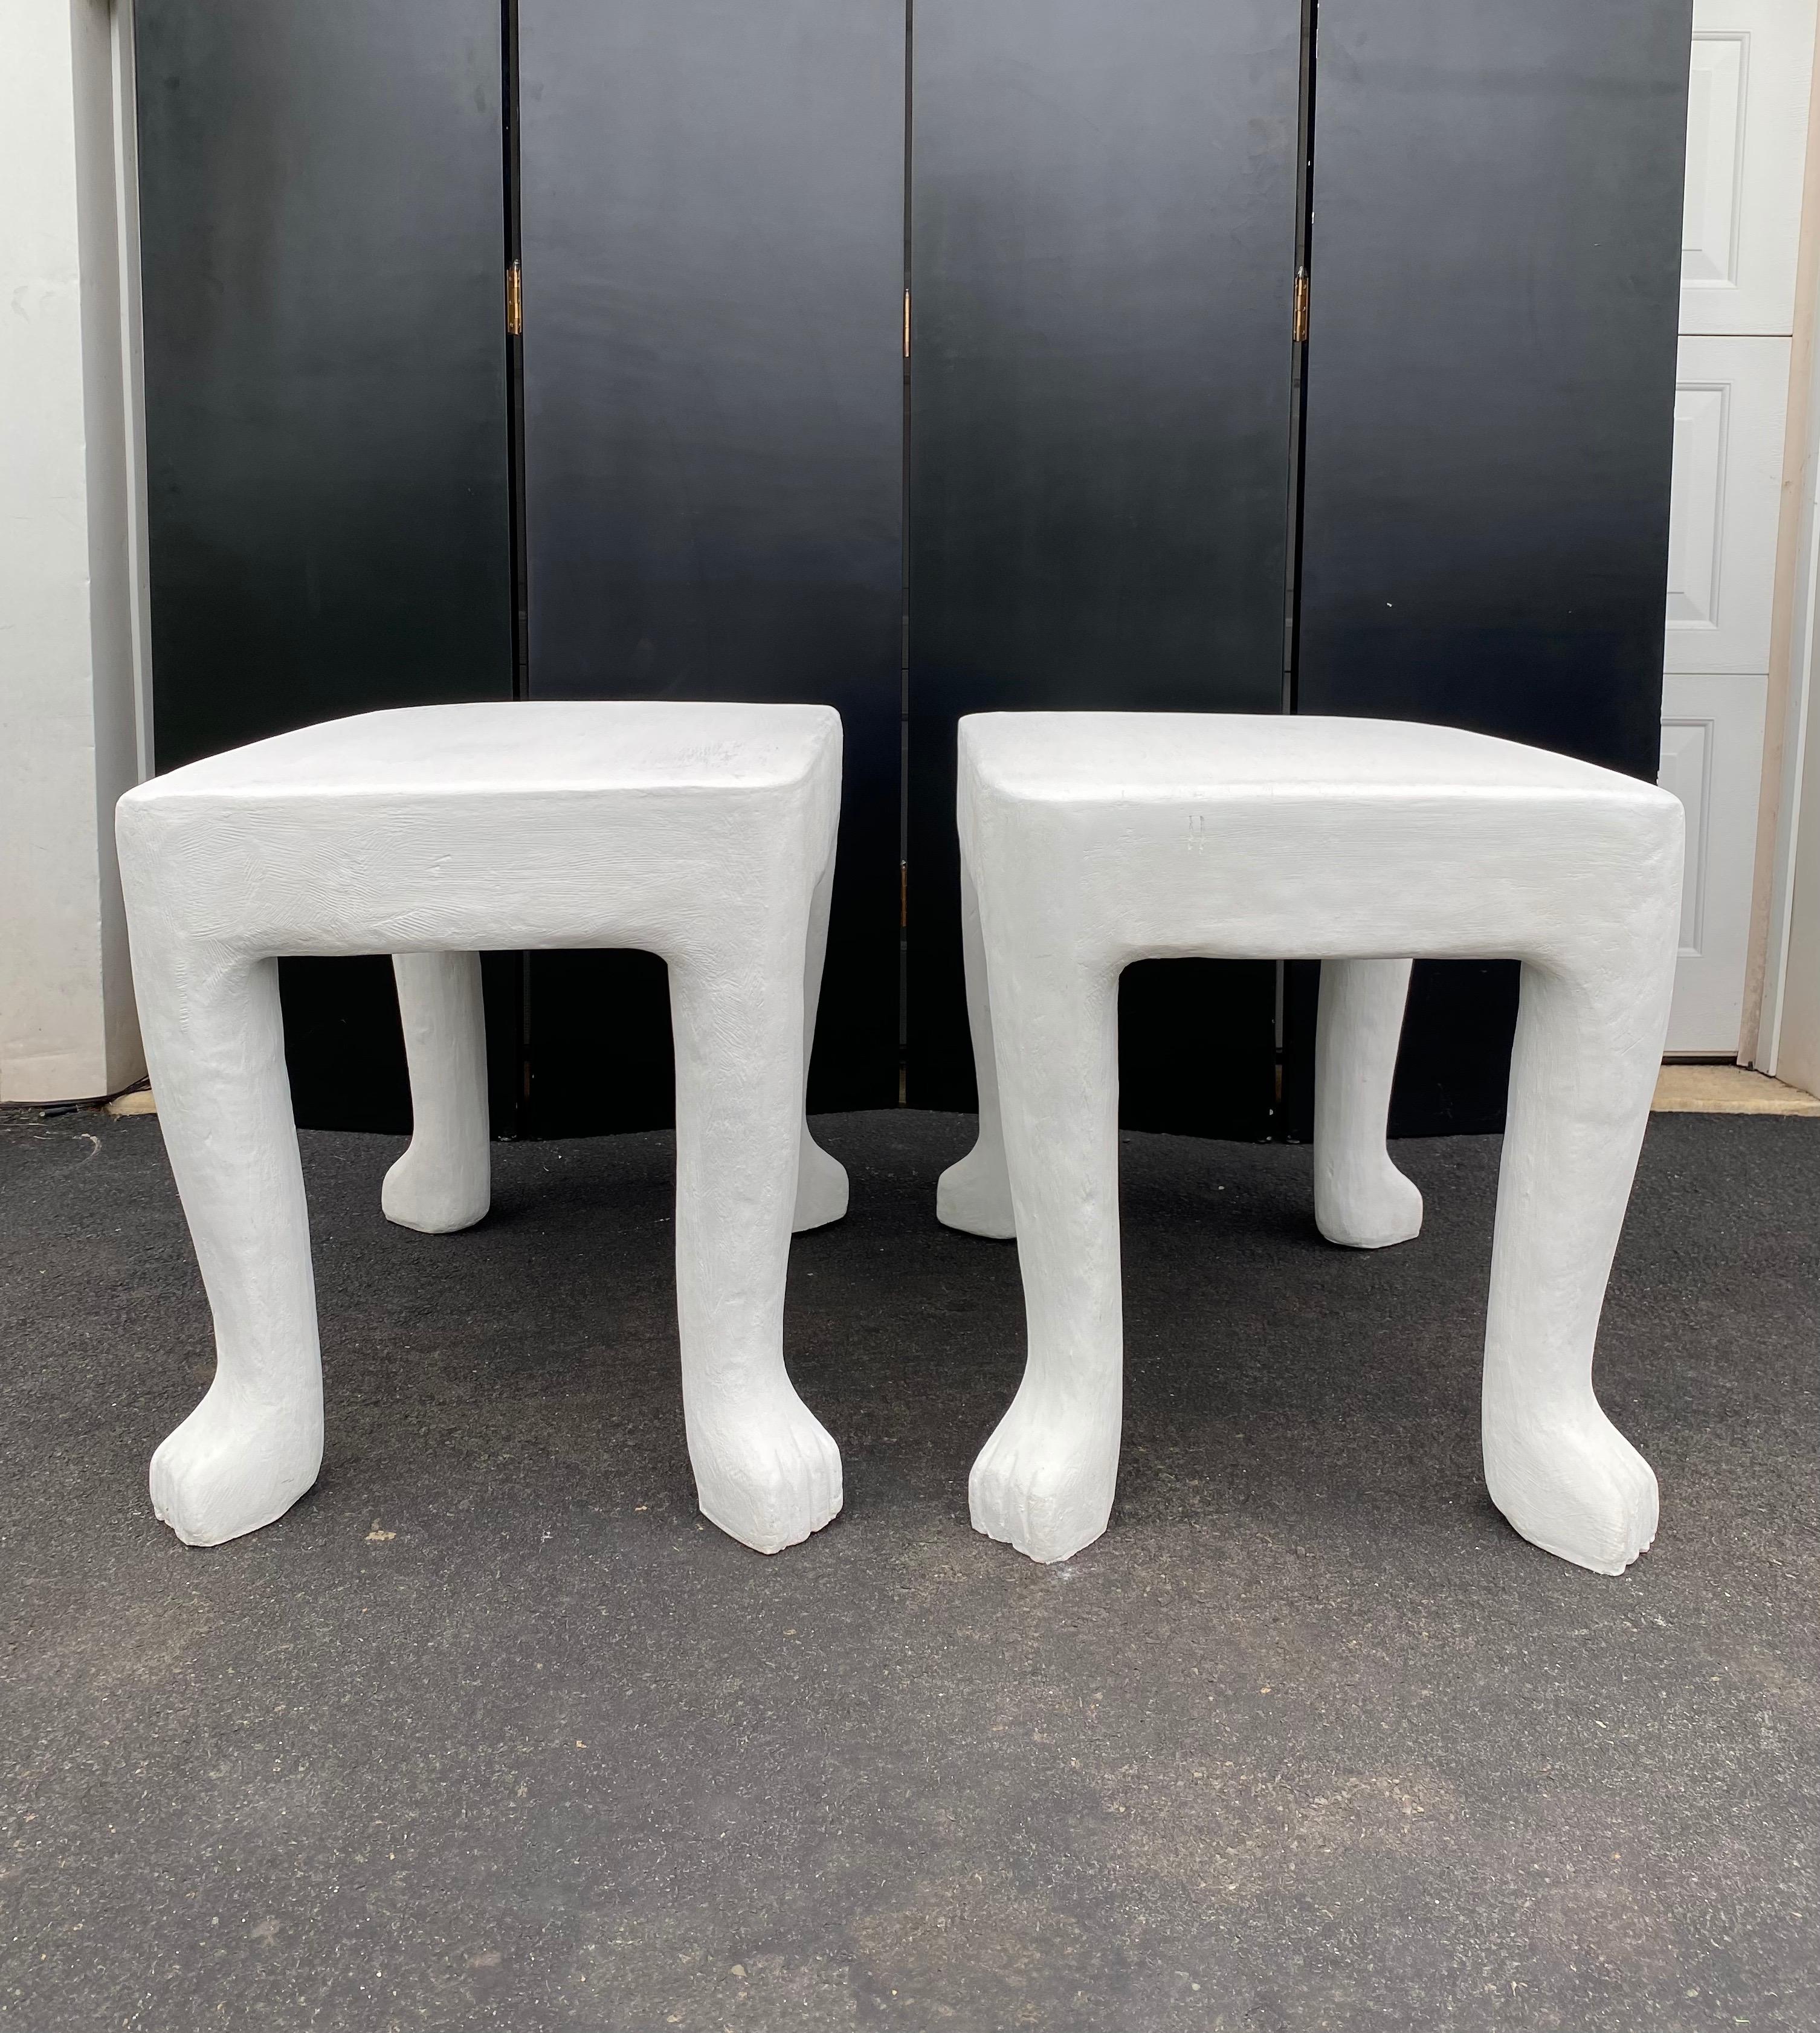 Pair of iconic John Dickinson footed end side tables. These early 2000s sculptural anthropomorphic tables are made of glass-fiber reinforced concrete in original plaster chalk white matte finish. 

These authentic statement pieces are artfully cast